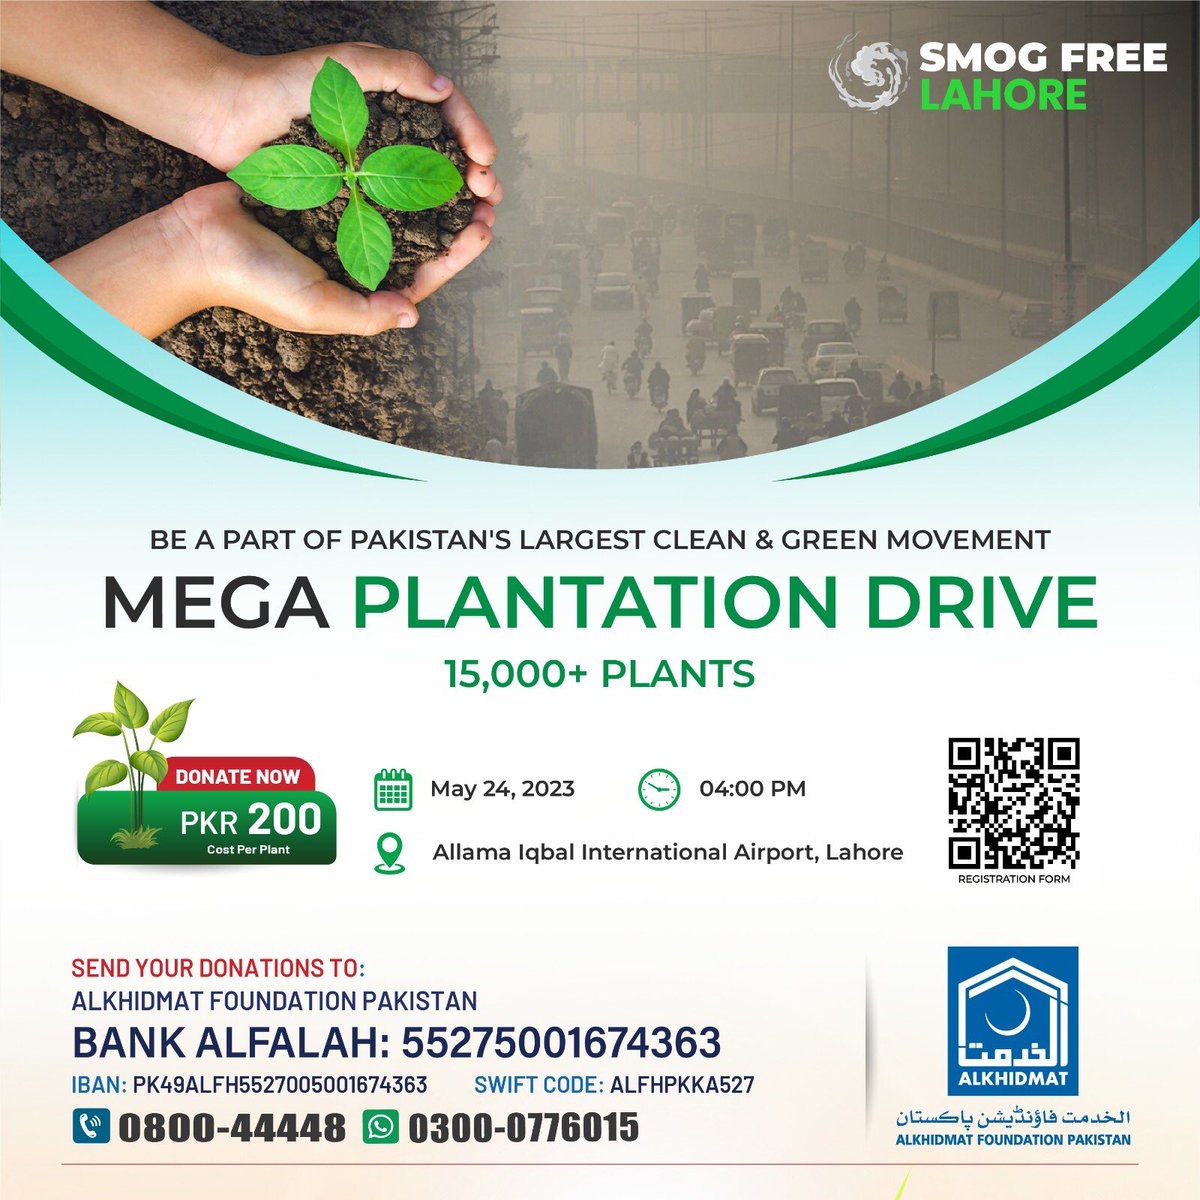 Join us on May 24, 2023, at Allama Iqbal International Airport for our Mega Plantation Drive, a part of the Clean and Green Pakistan Drive! 
Fill out the Registration form to volunteer and donate for plants:
forms.gle/L274tKti81fxAJ…
#smogfreelahore #alkhidmatfoundation #plantatree